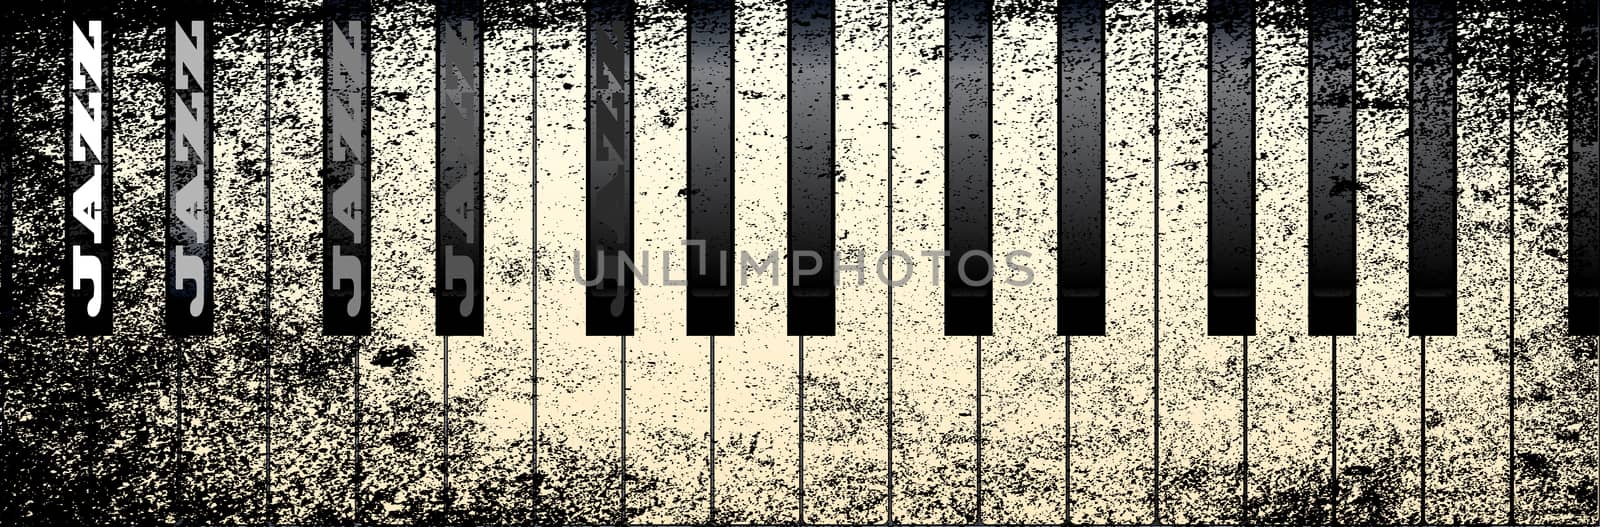 Piano keys in a grunge style with the legend JAZZ on several black keys